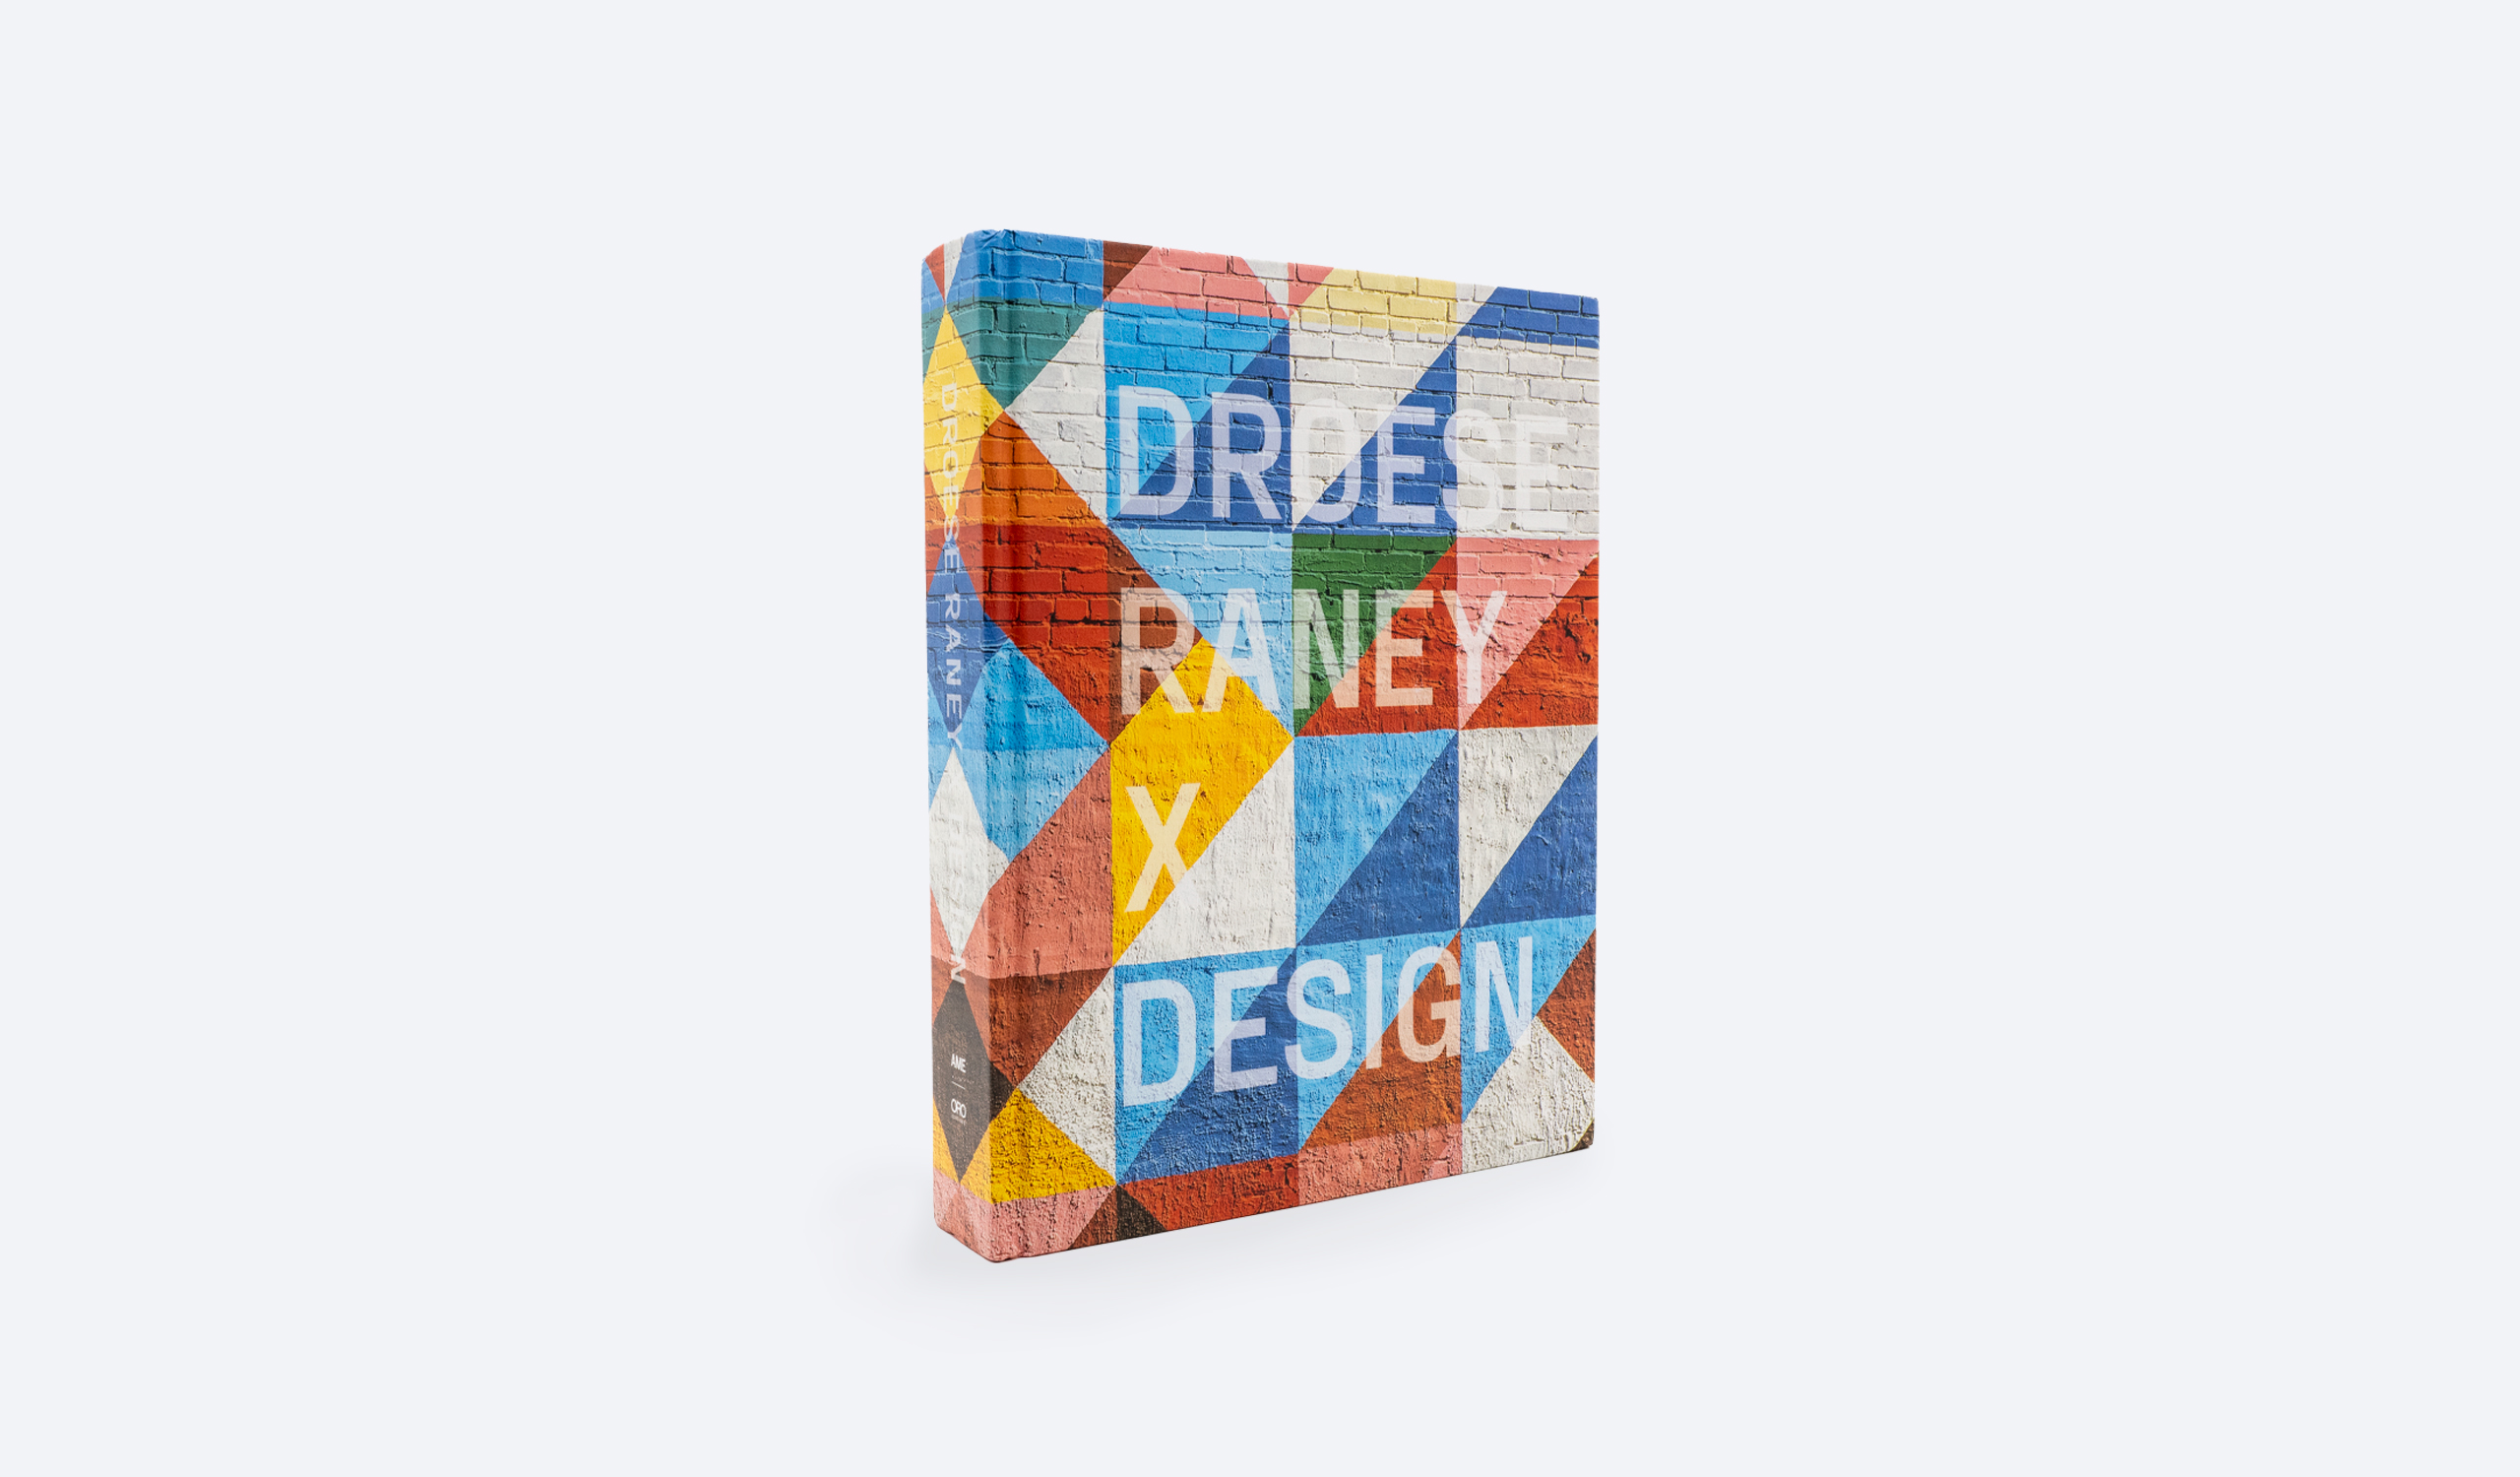 Droese x Raney Design